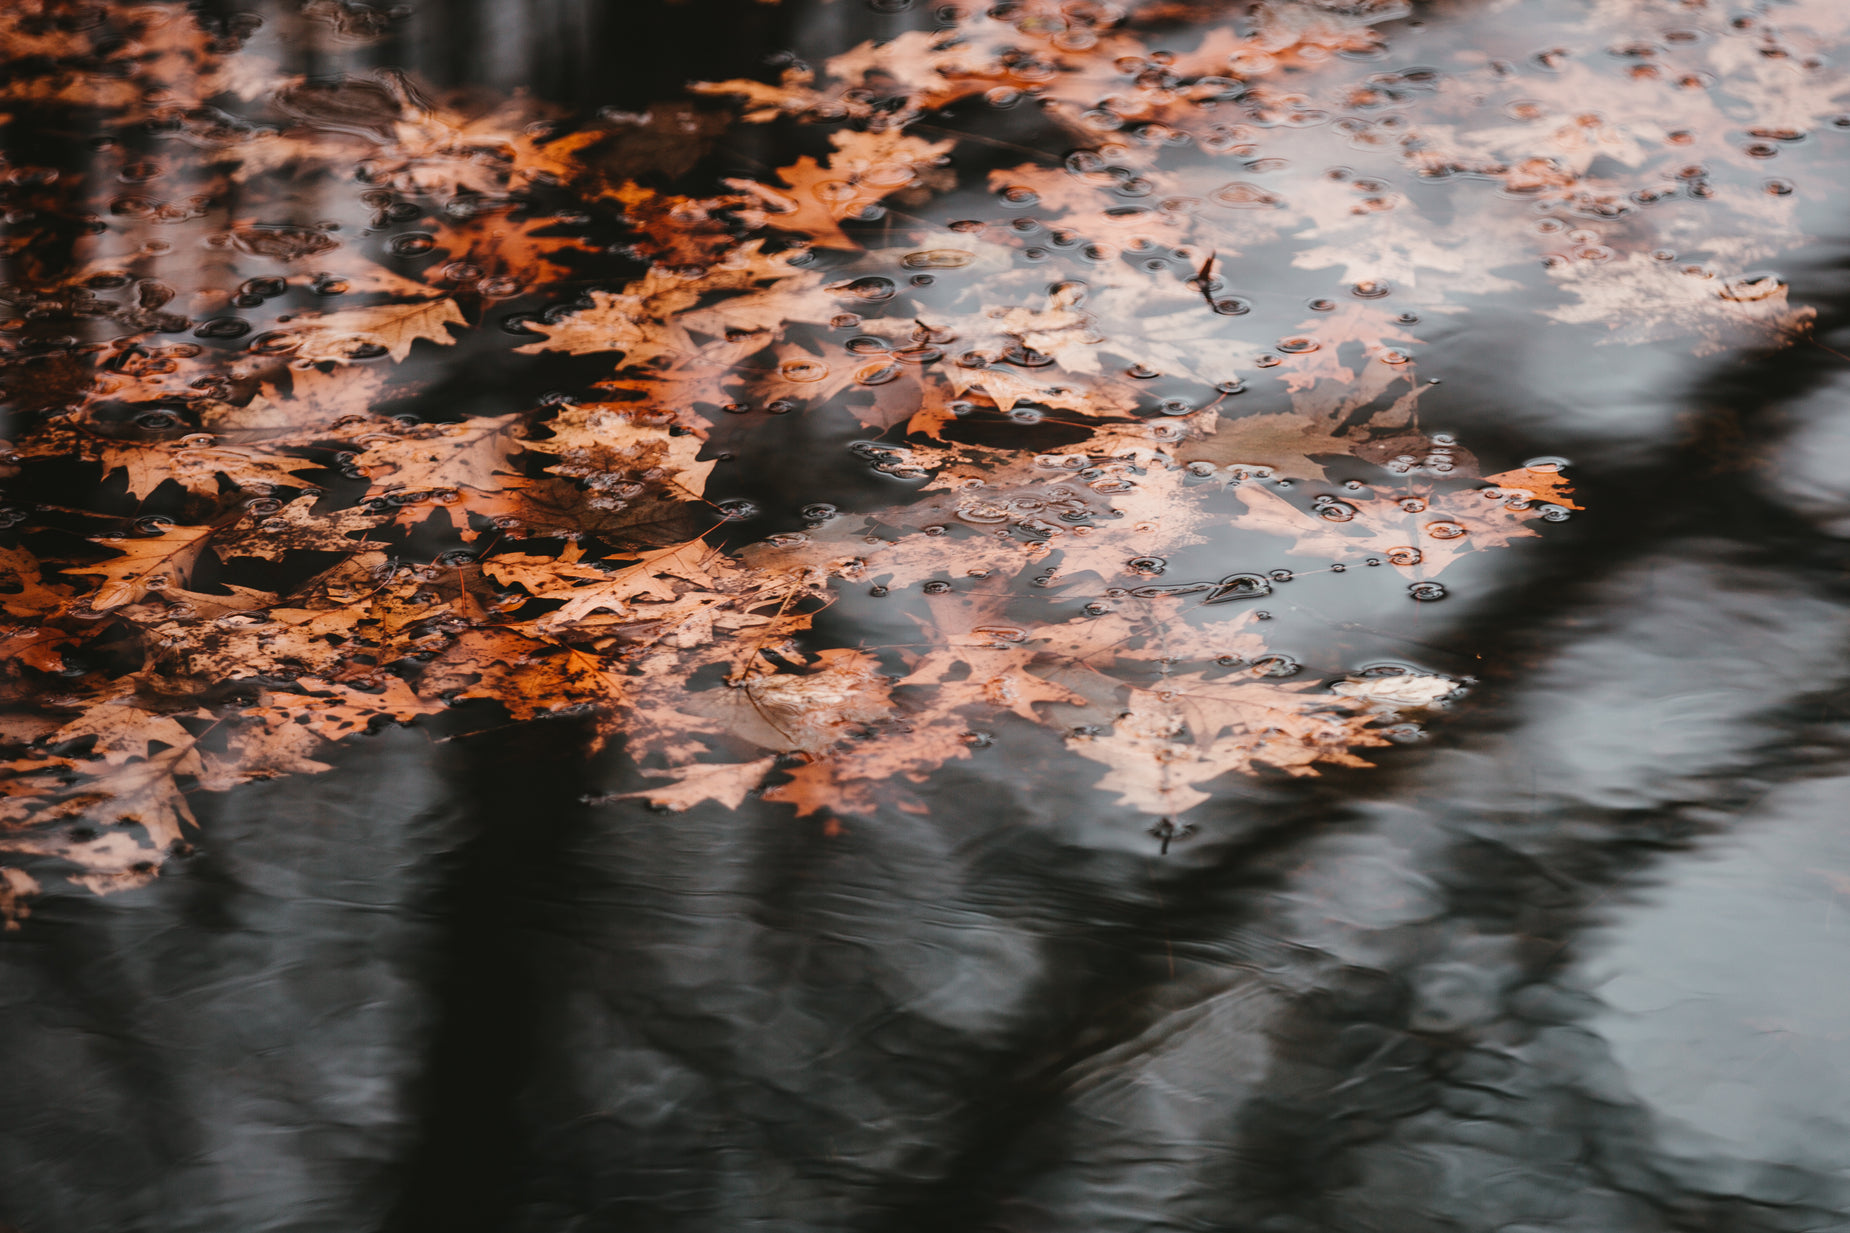 a reflection of a tree and leaves on a surface of water